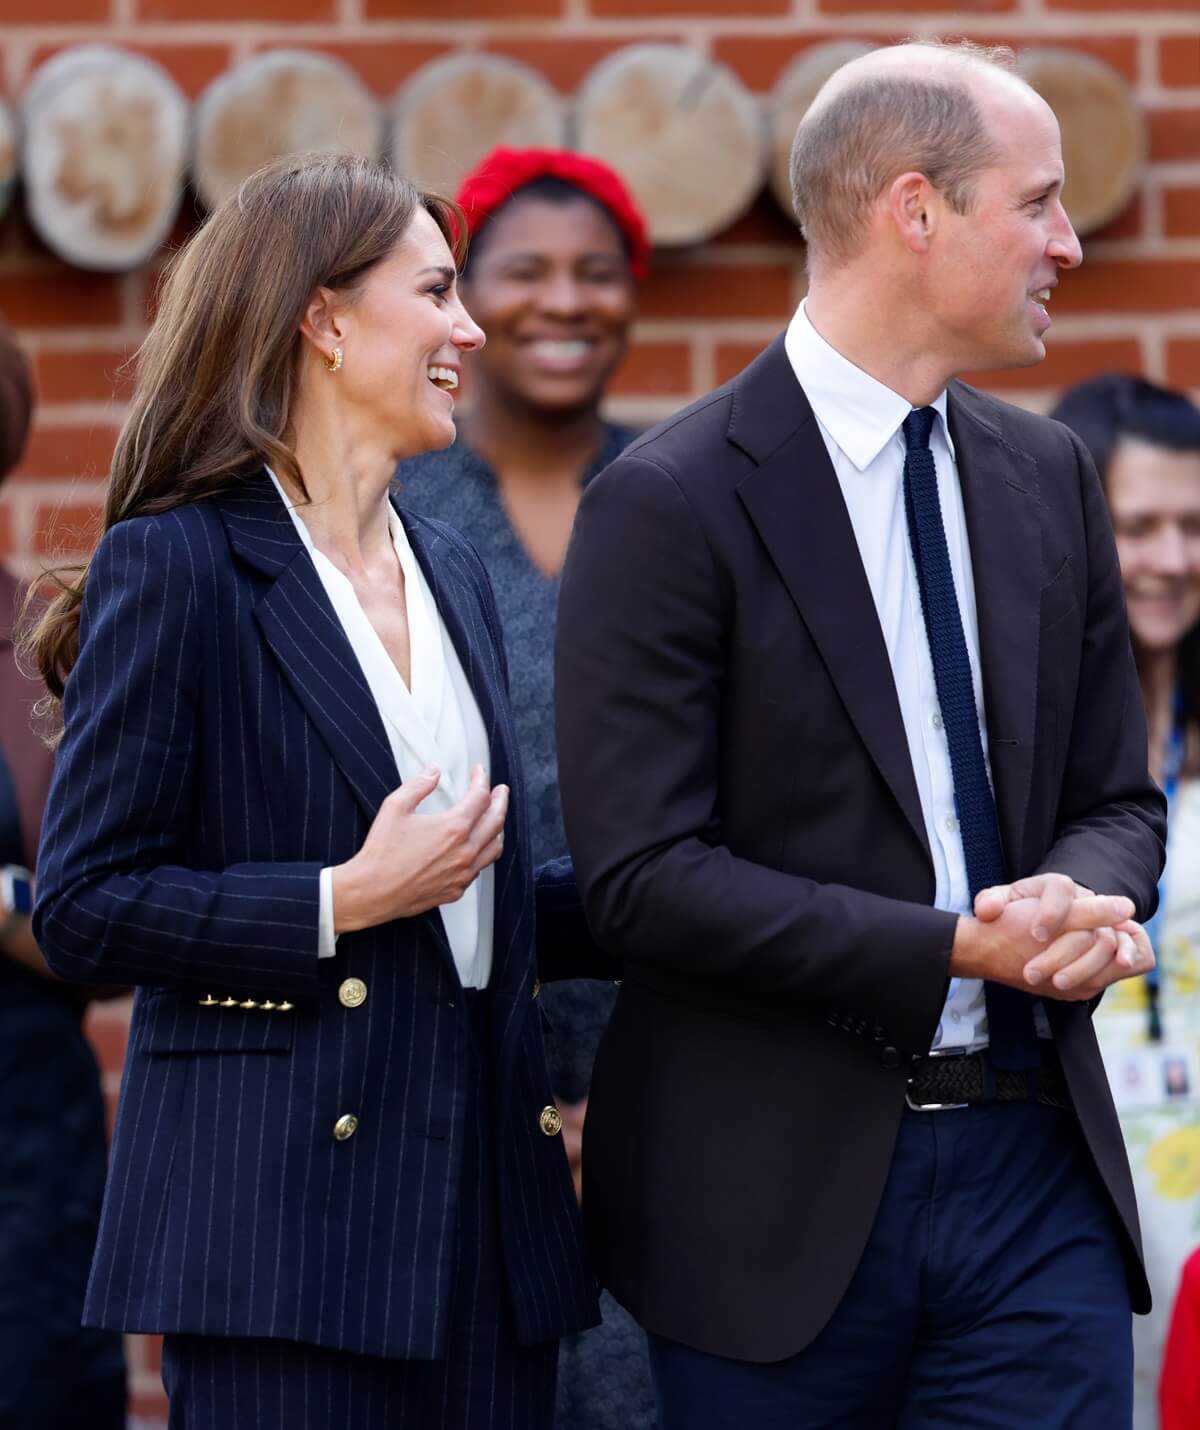 Kate Middleton and Prince William visit the Grange Pavilion to meet with members of the Windrush Cymru Elders in Wales